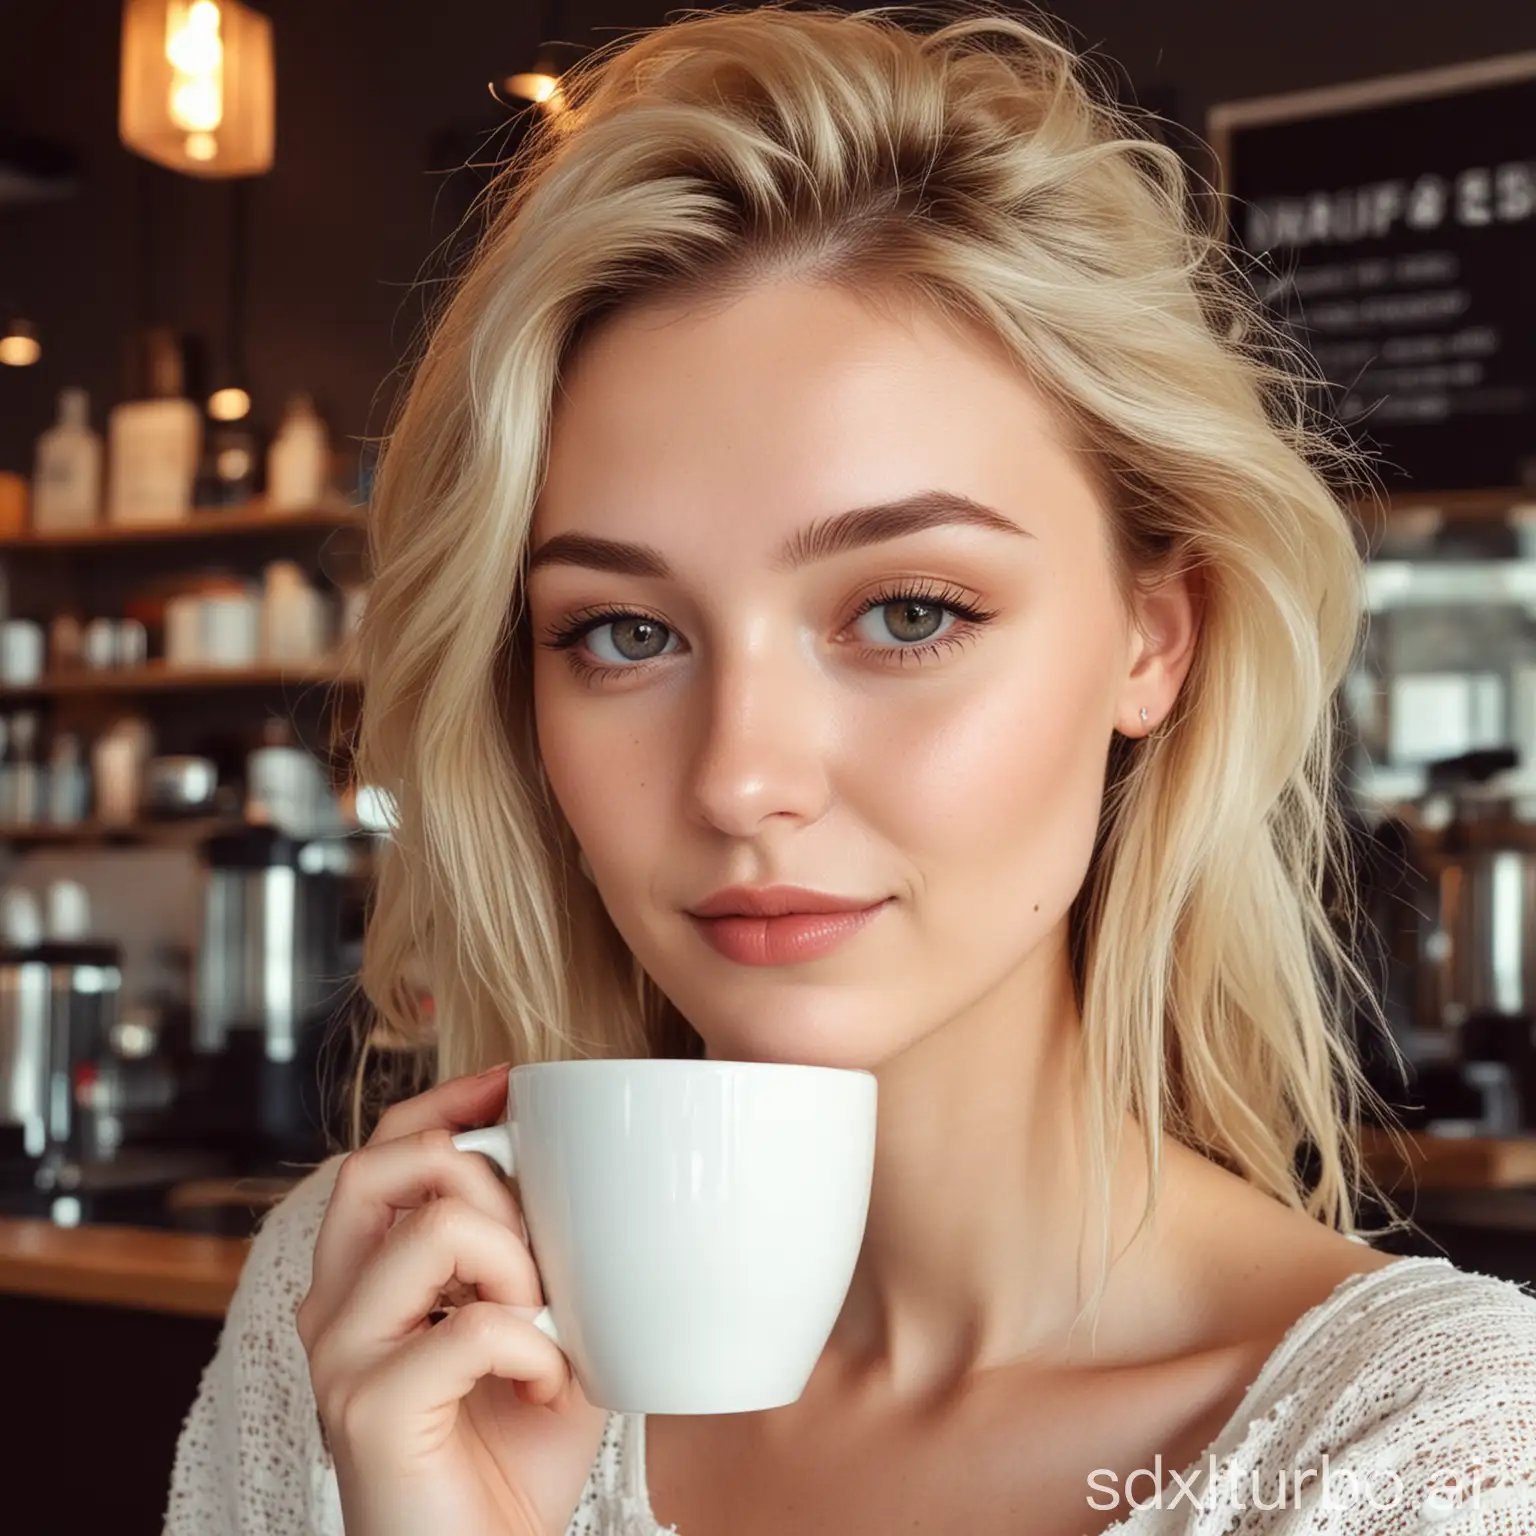 profile picture, coffee shop, fair skinned lady